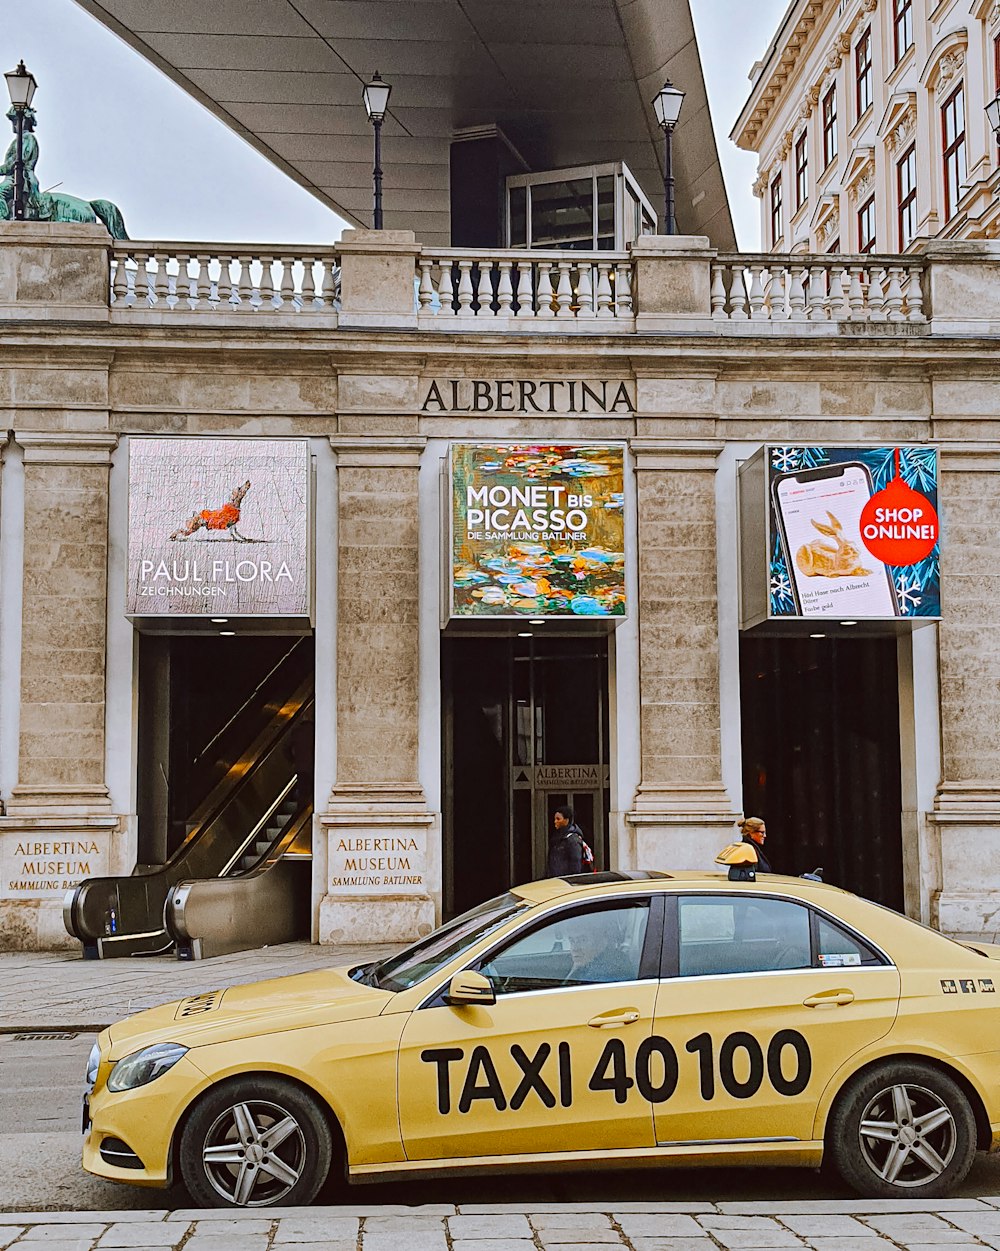 a taxi cab parked in front of a building